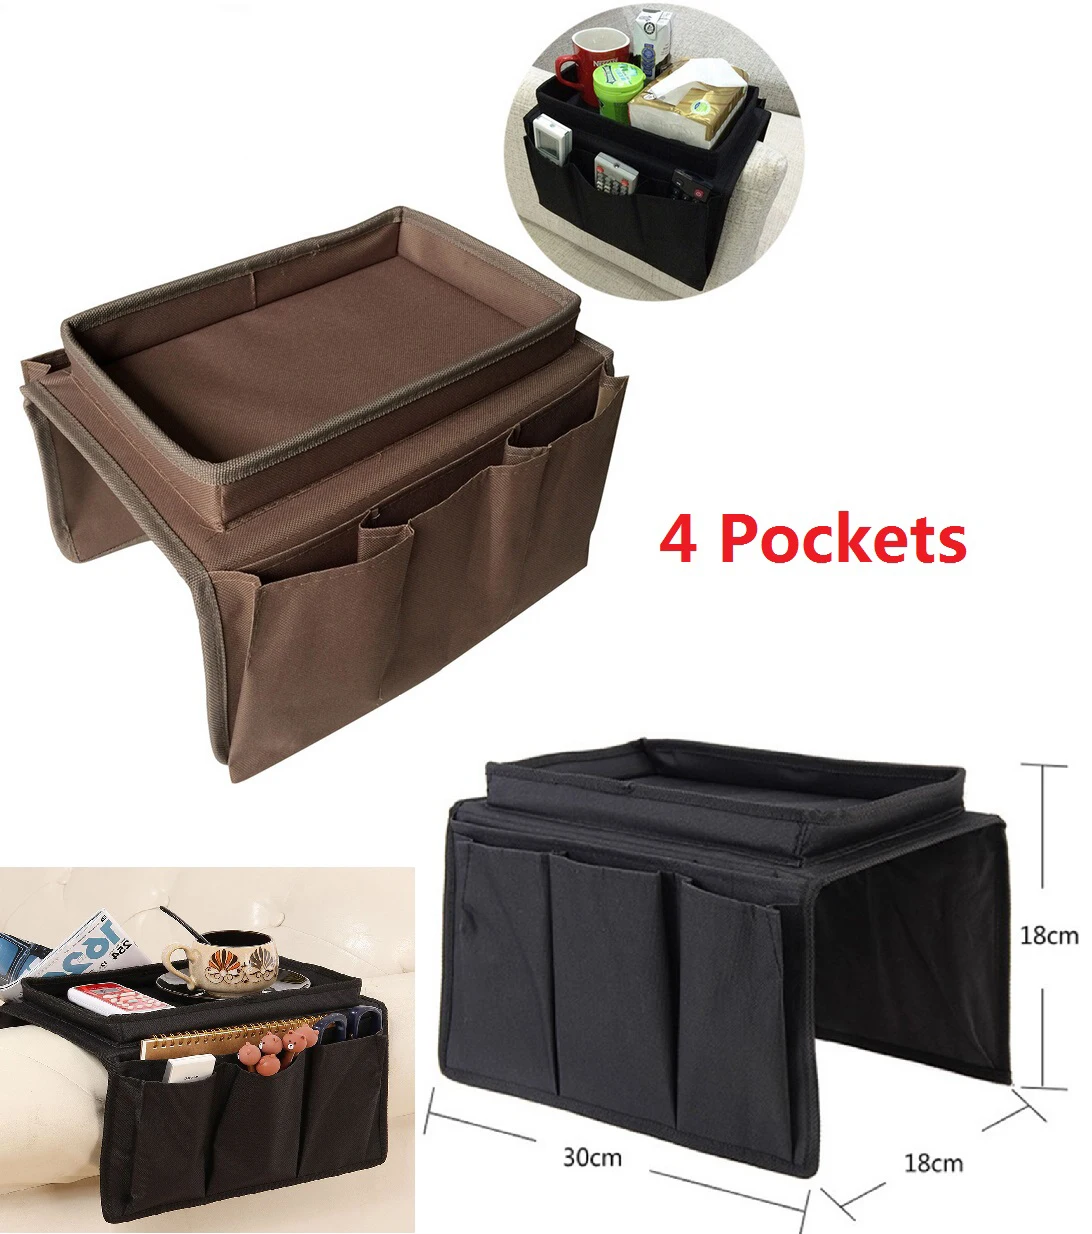 Space Saver Bag Sofa Armrest Organizer Cloth Storage Pouch Holder for Cellphone Magazines Glasses TV Remote Control Anti-Slip Caddy Pocket for Couch Armchair Brown 